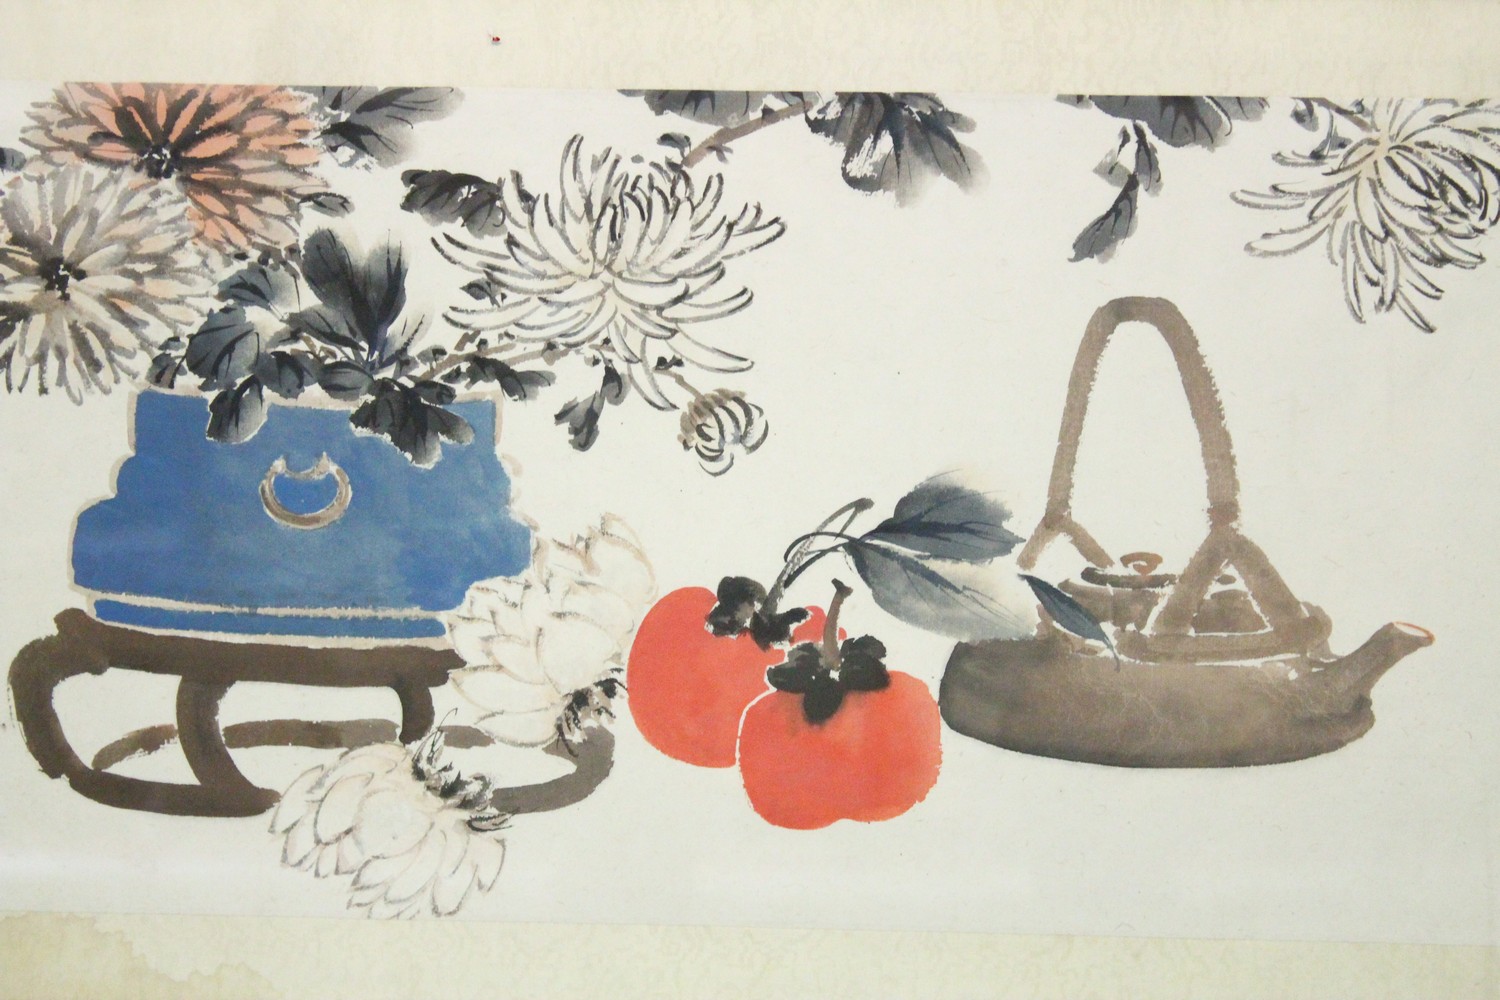 A GOOD 20TH CENTURY CHINESE PAINTING ON PAPER HANGING SCROLL BY PANG ZHAO 1915 - 1967, the - Image 2 of 4